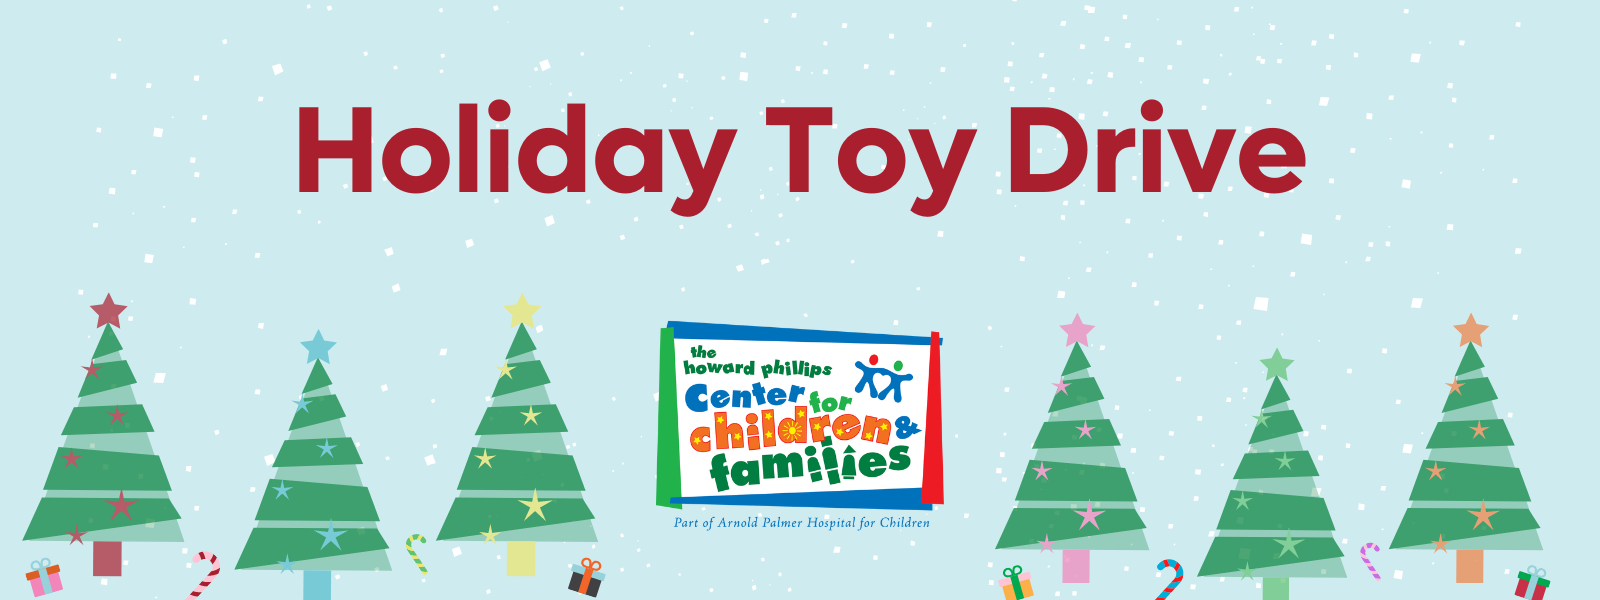 Holiday Toy Drive Header with Trees